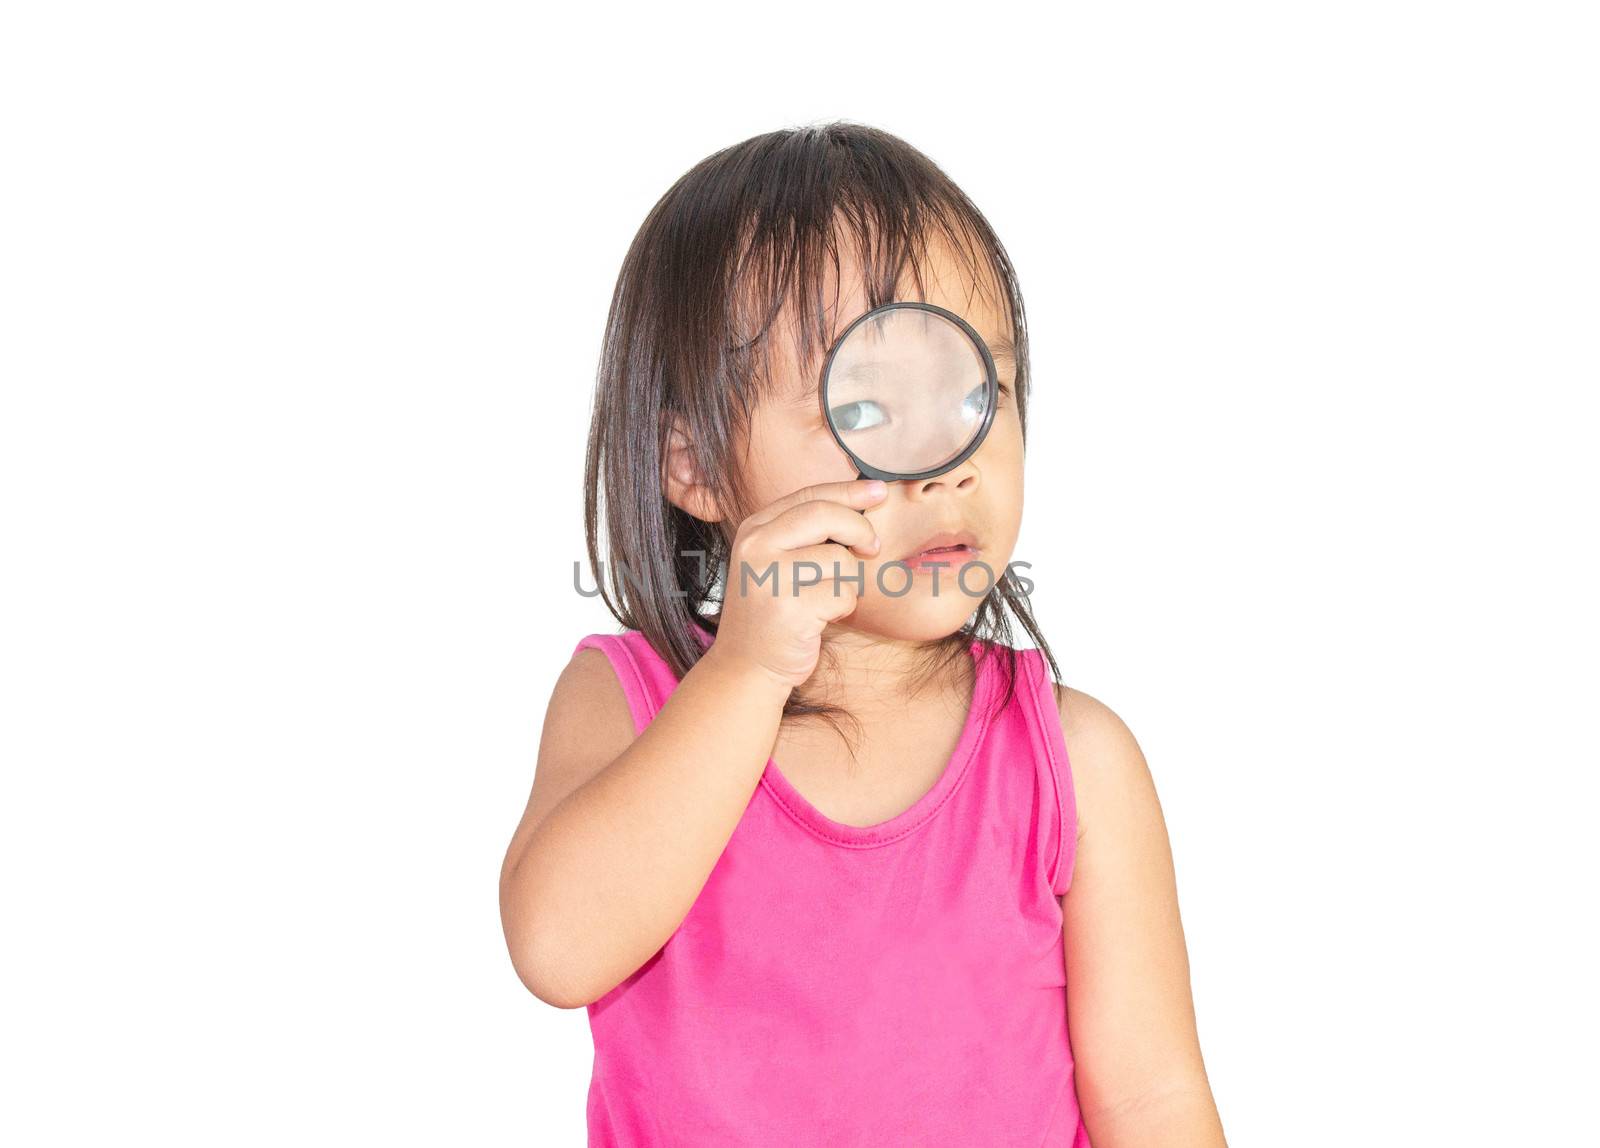 Adorable Asian child holding a magnifying glass and wearing pink dress isolated on a white background.